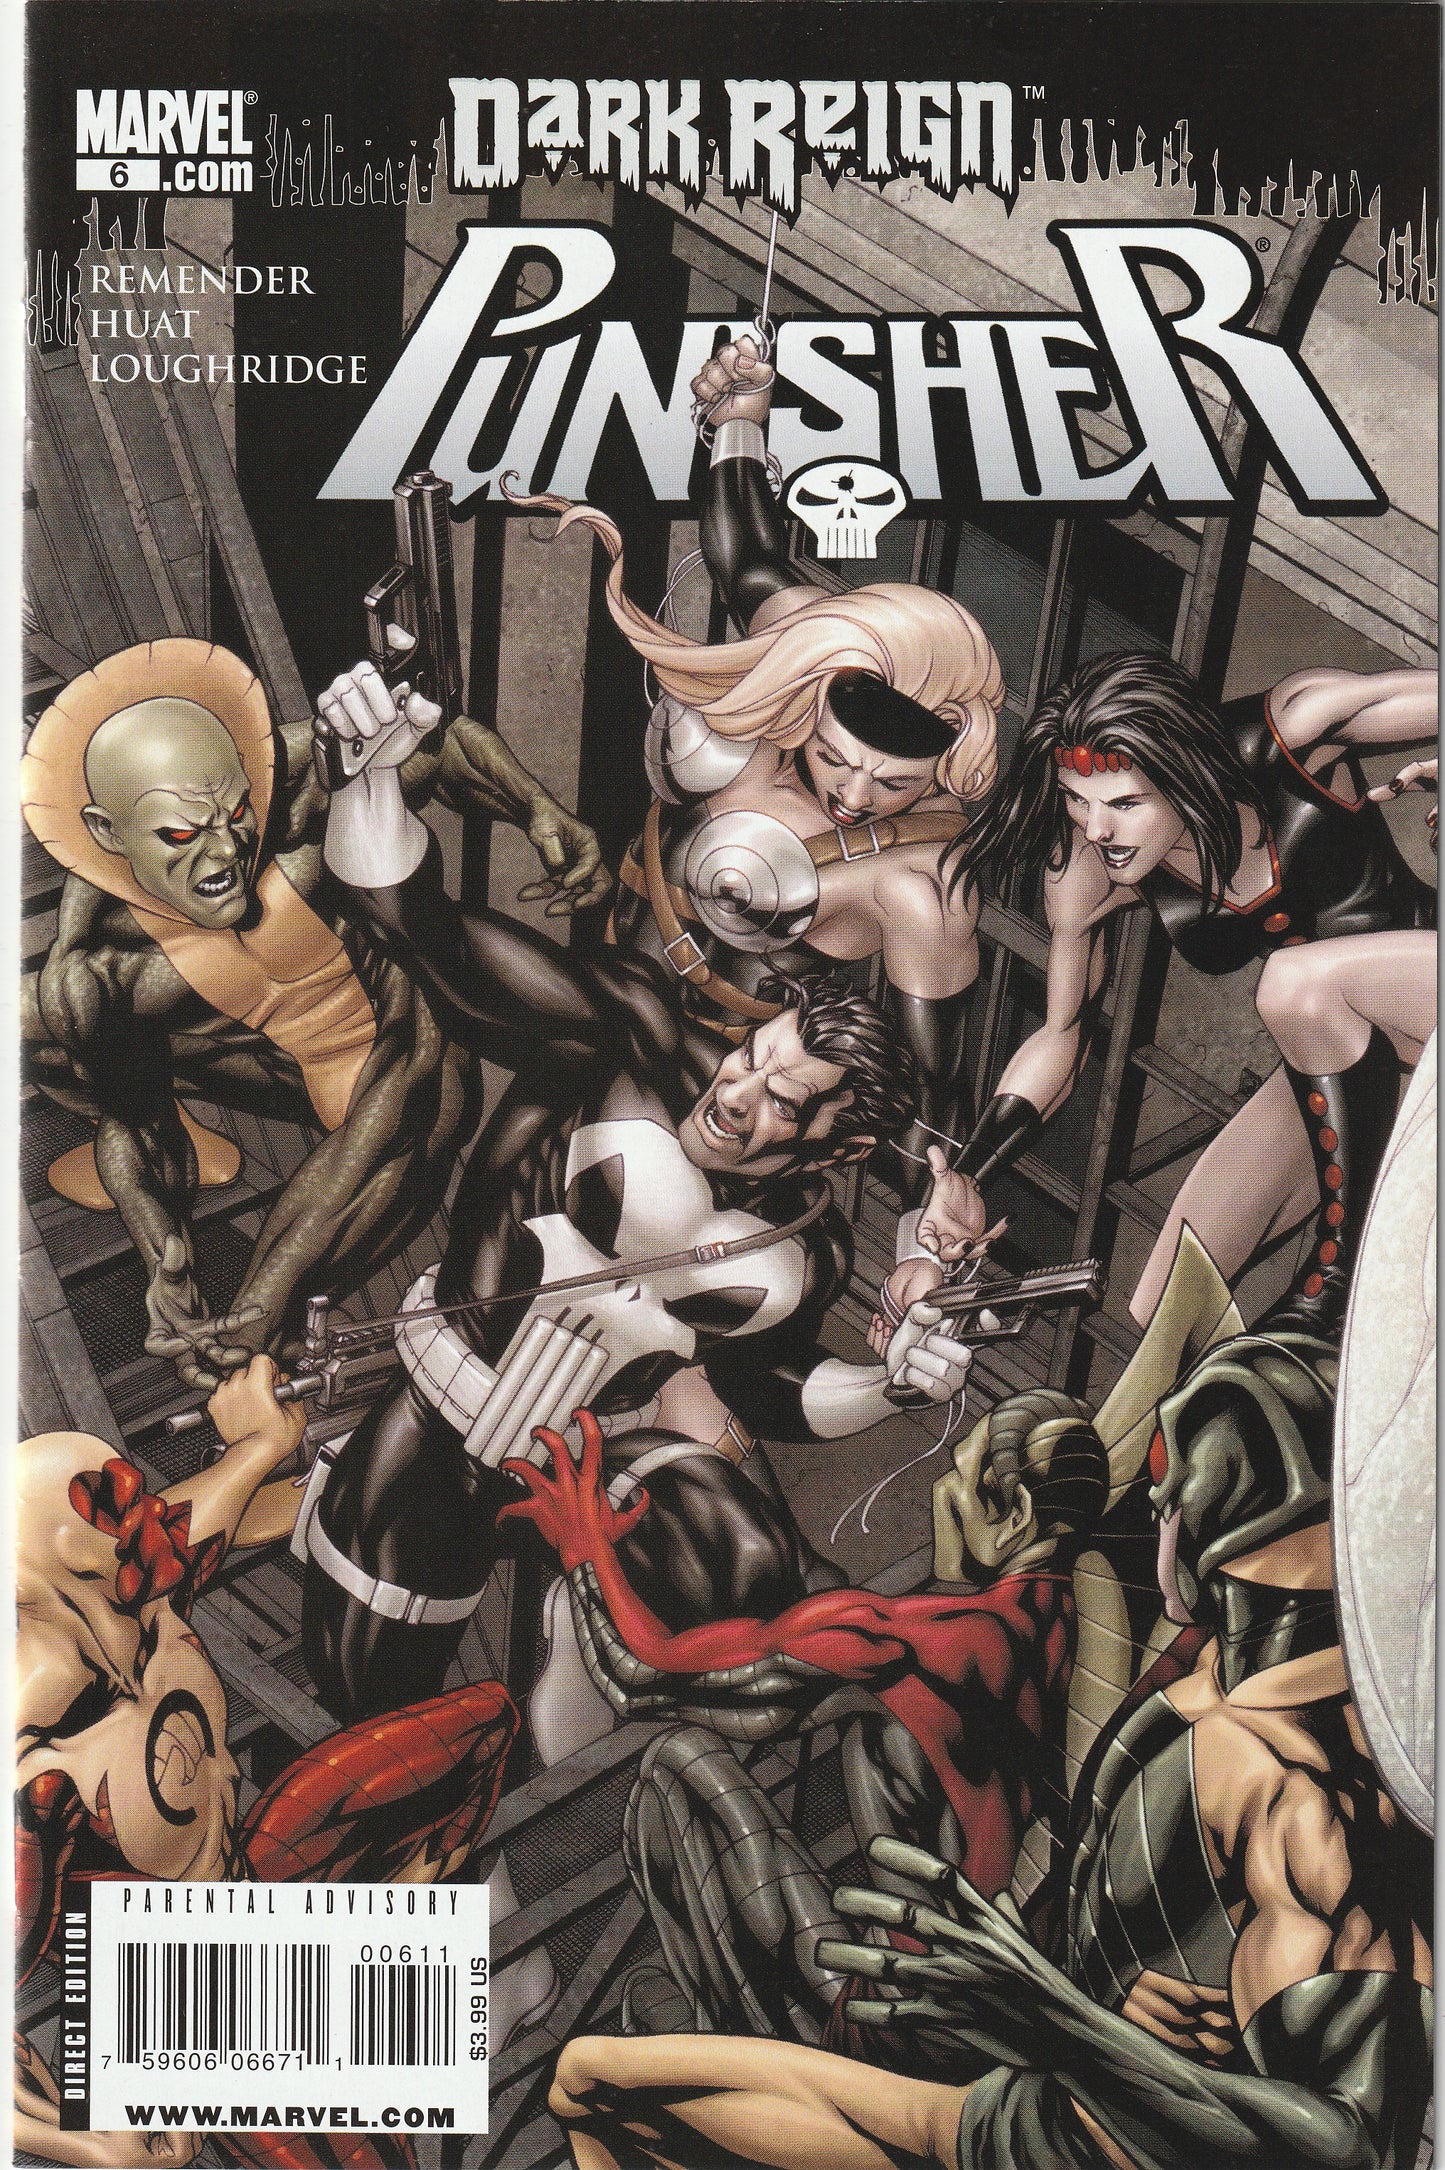 The Punisher #6 (Vol 8, 2009)